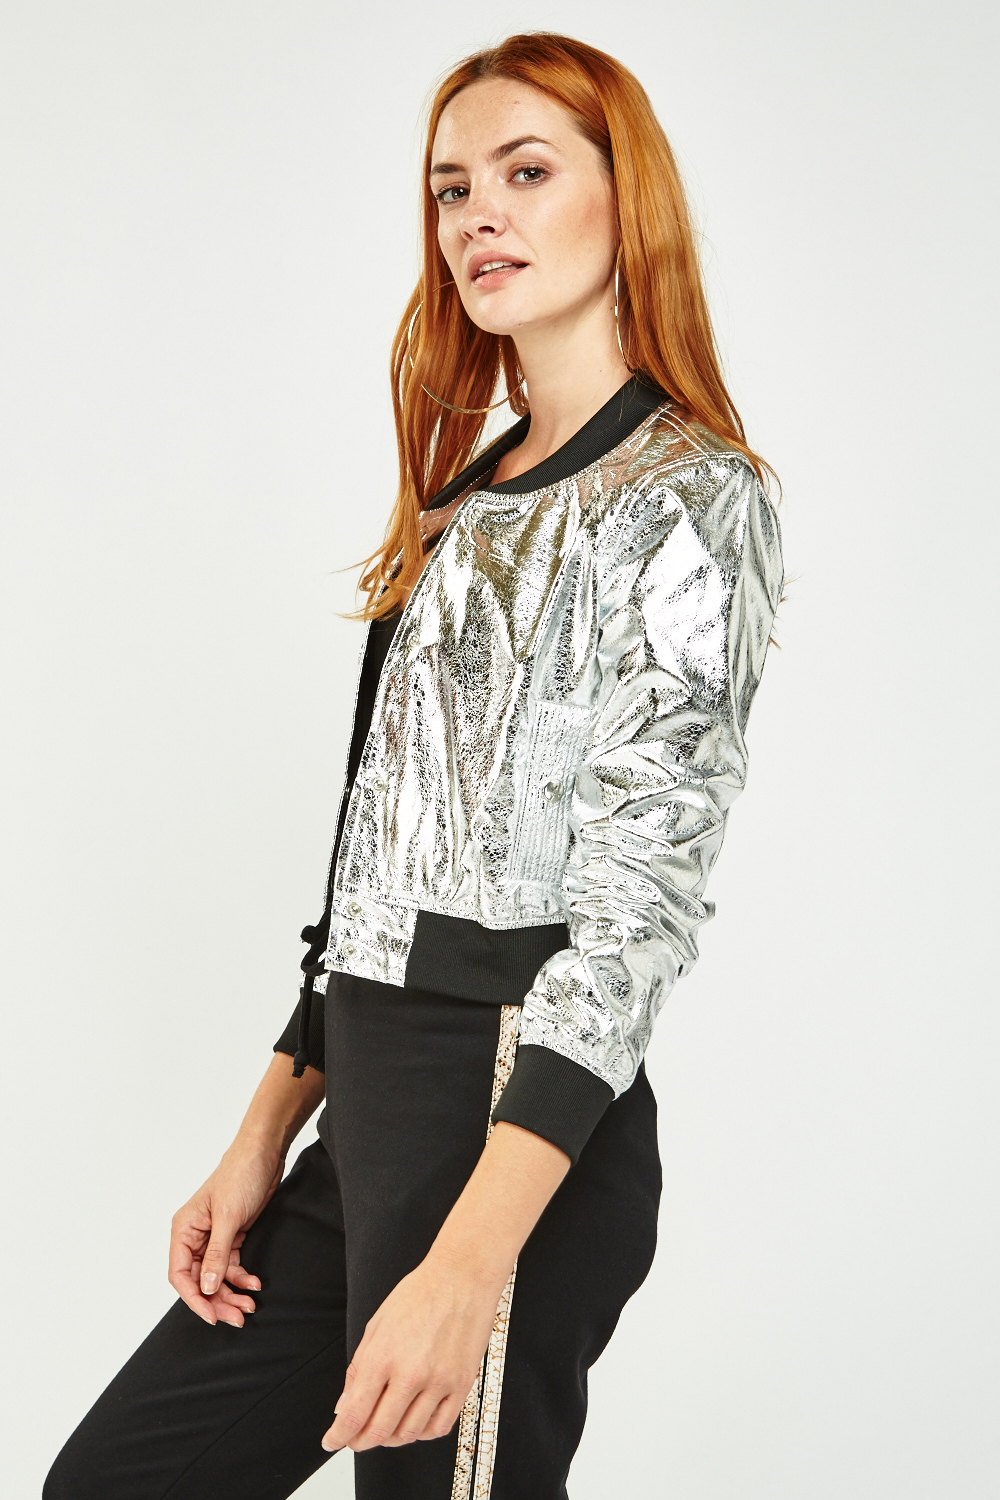 Holographic Bomber Jacket - Just $7